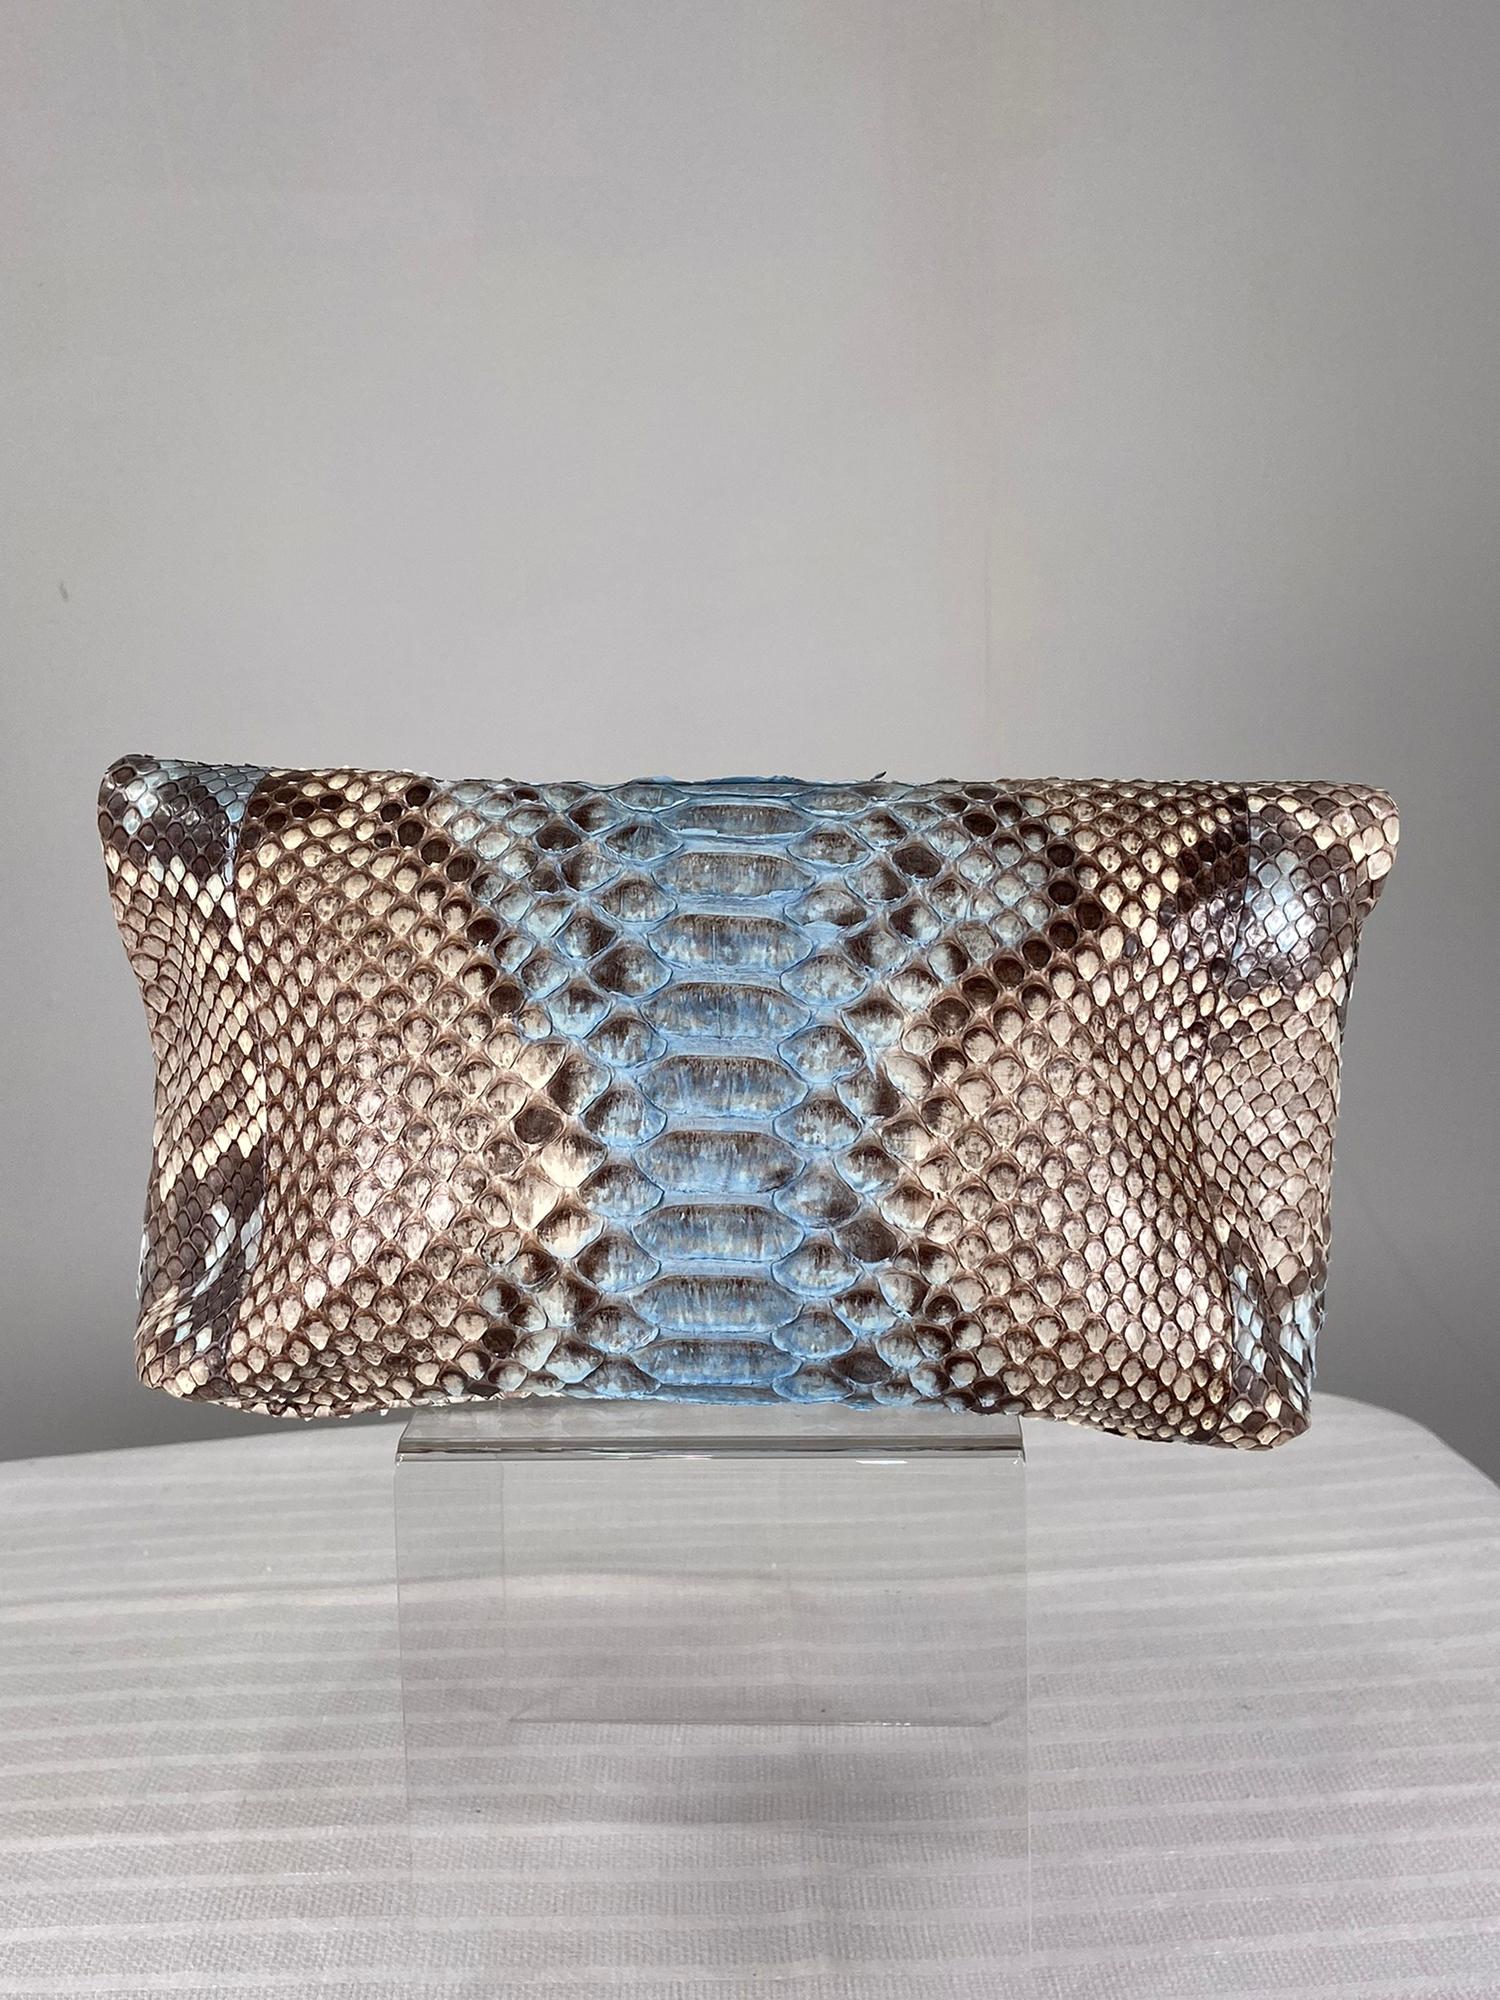 Blue & natural snakeskin fold over clutch handbag from Laurent Effel St Barth, made in Italy. Great casual bag, lined in light taupe suede. Closes with hidden magnetic snap. Perfect grab and go day bag. In excellent barely used condition.